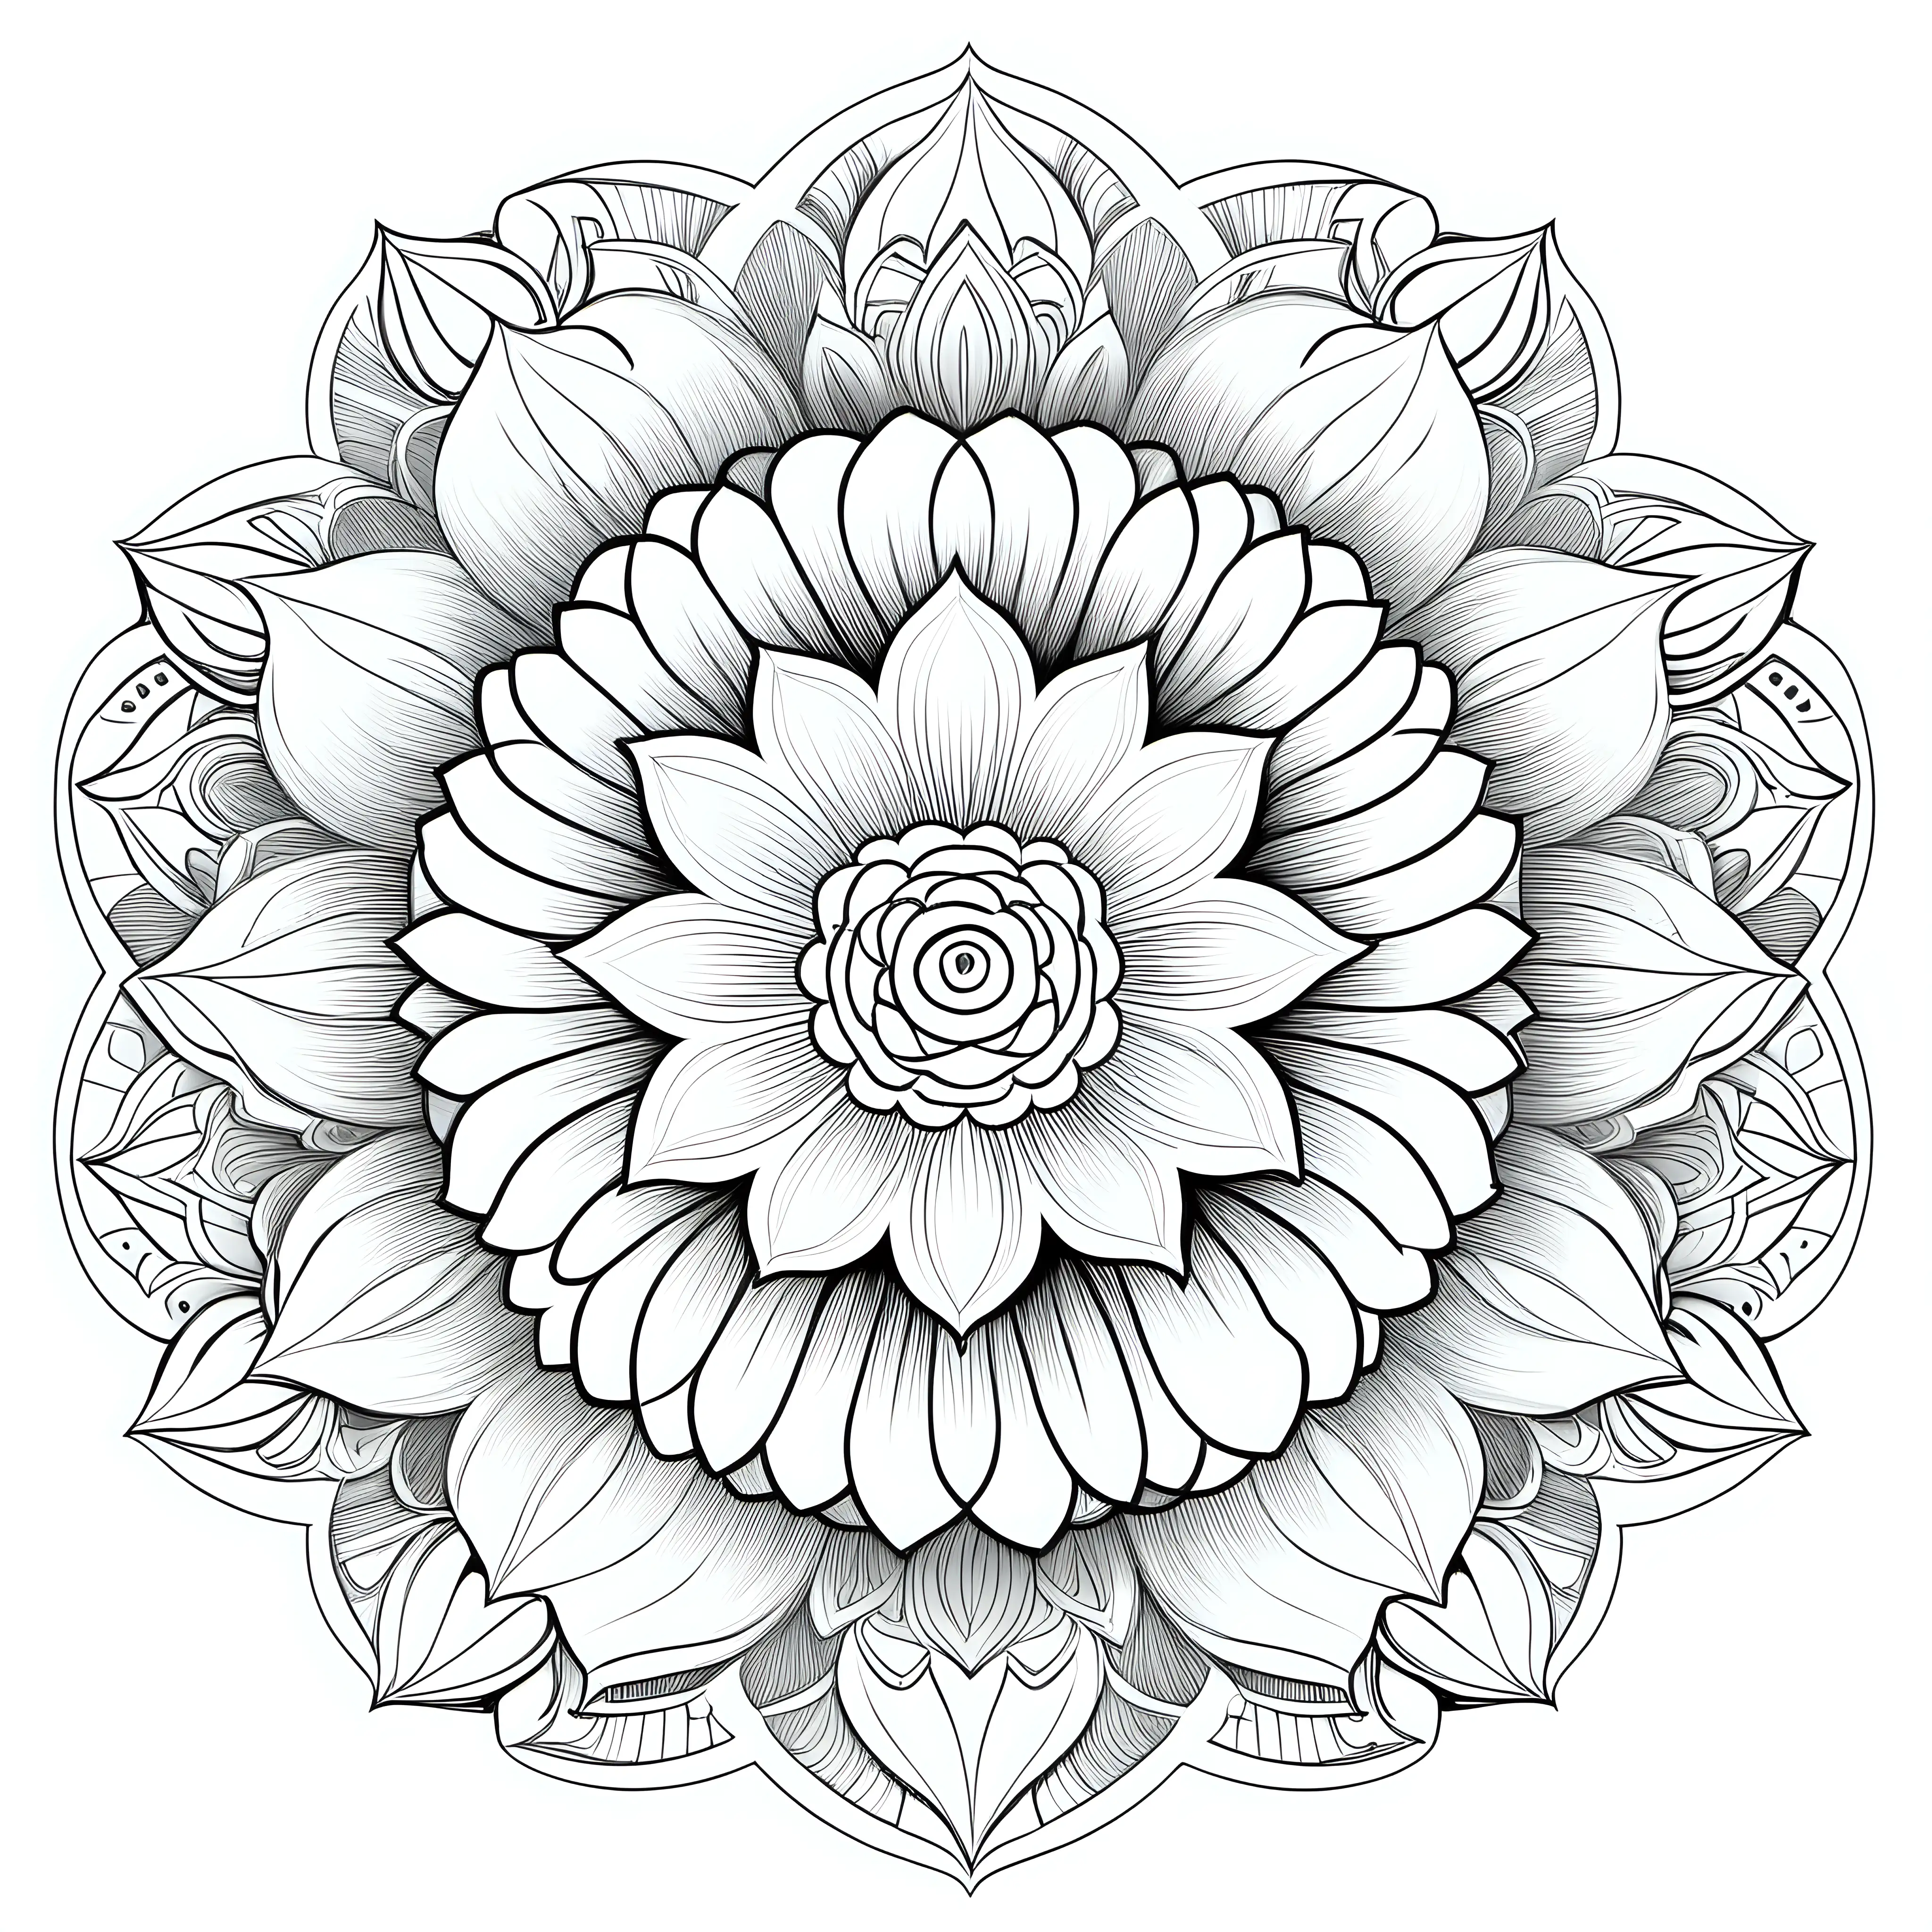 Floral Mandala Coloring Design with Intricate Petals and Symmetry